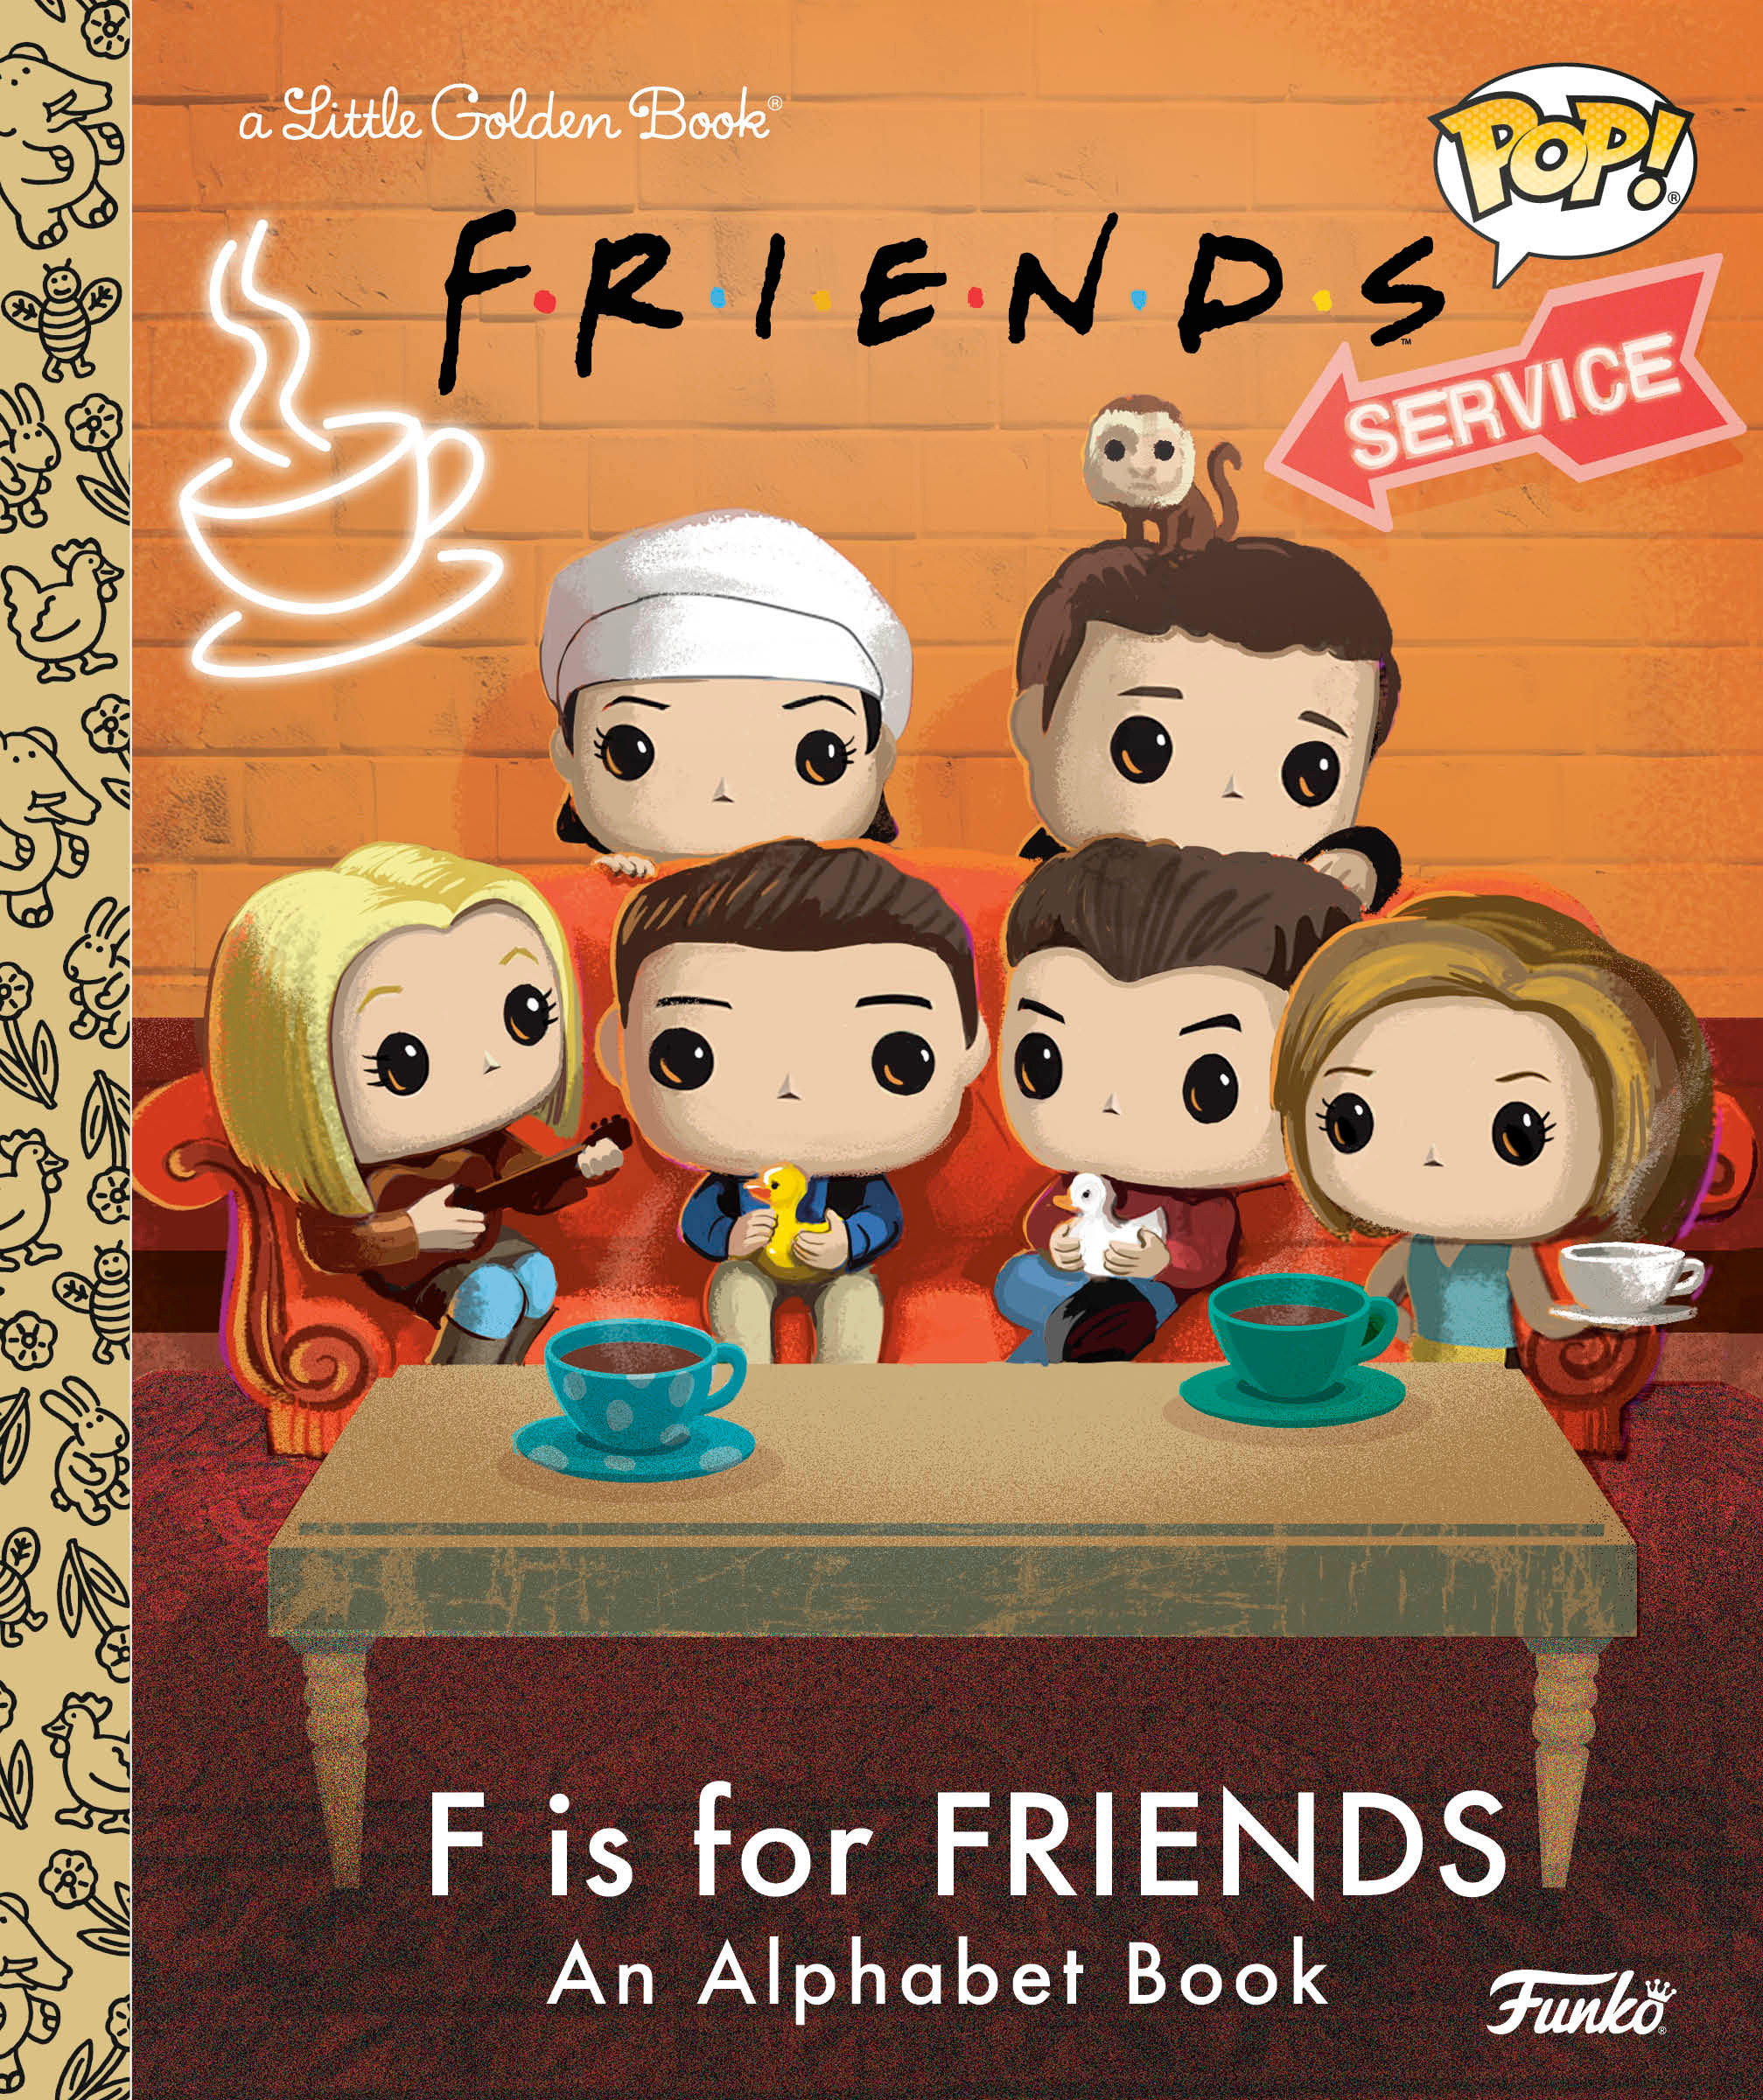 Funko F Is For Friends Little Golden Book Hardcover